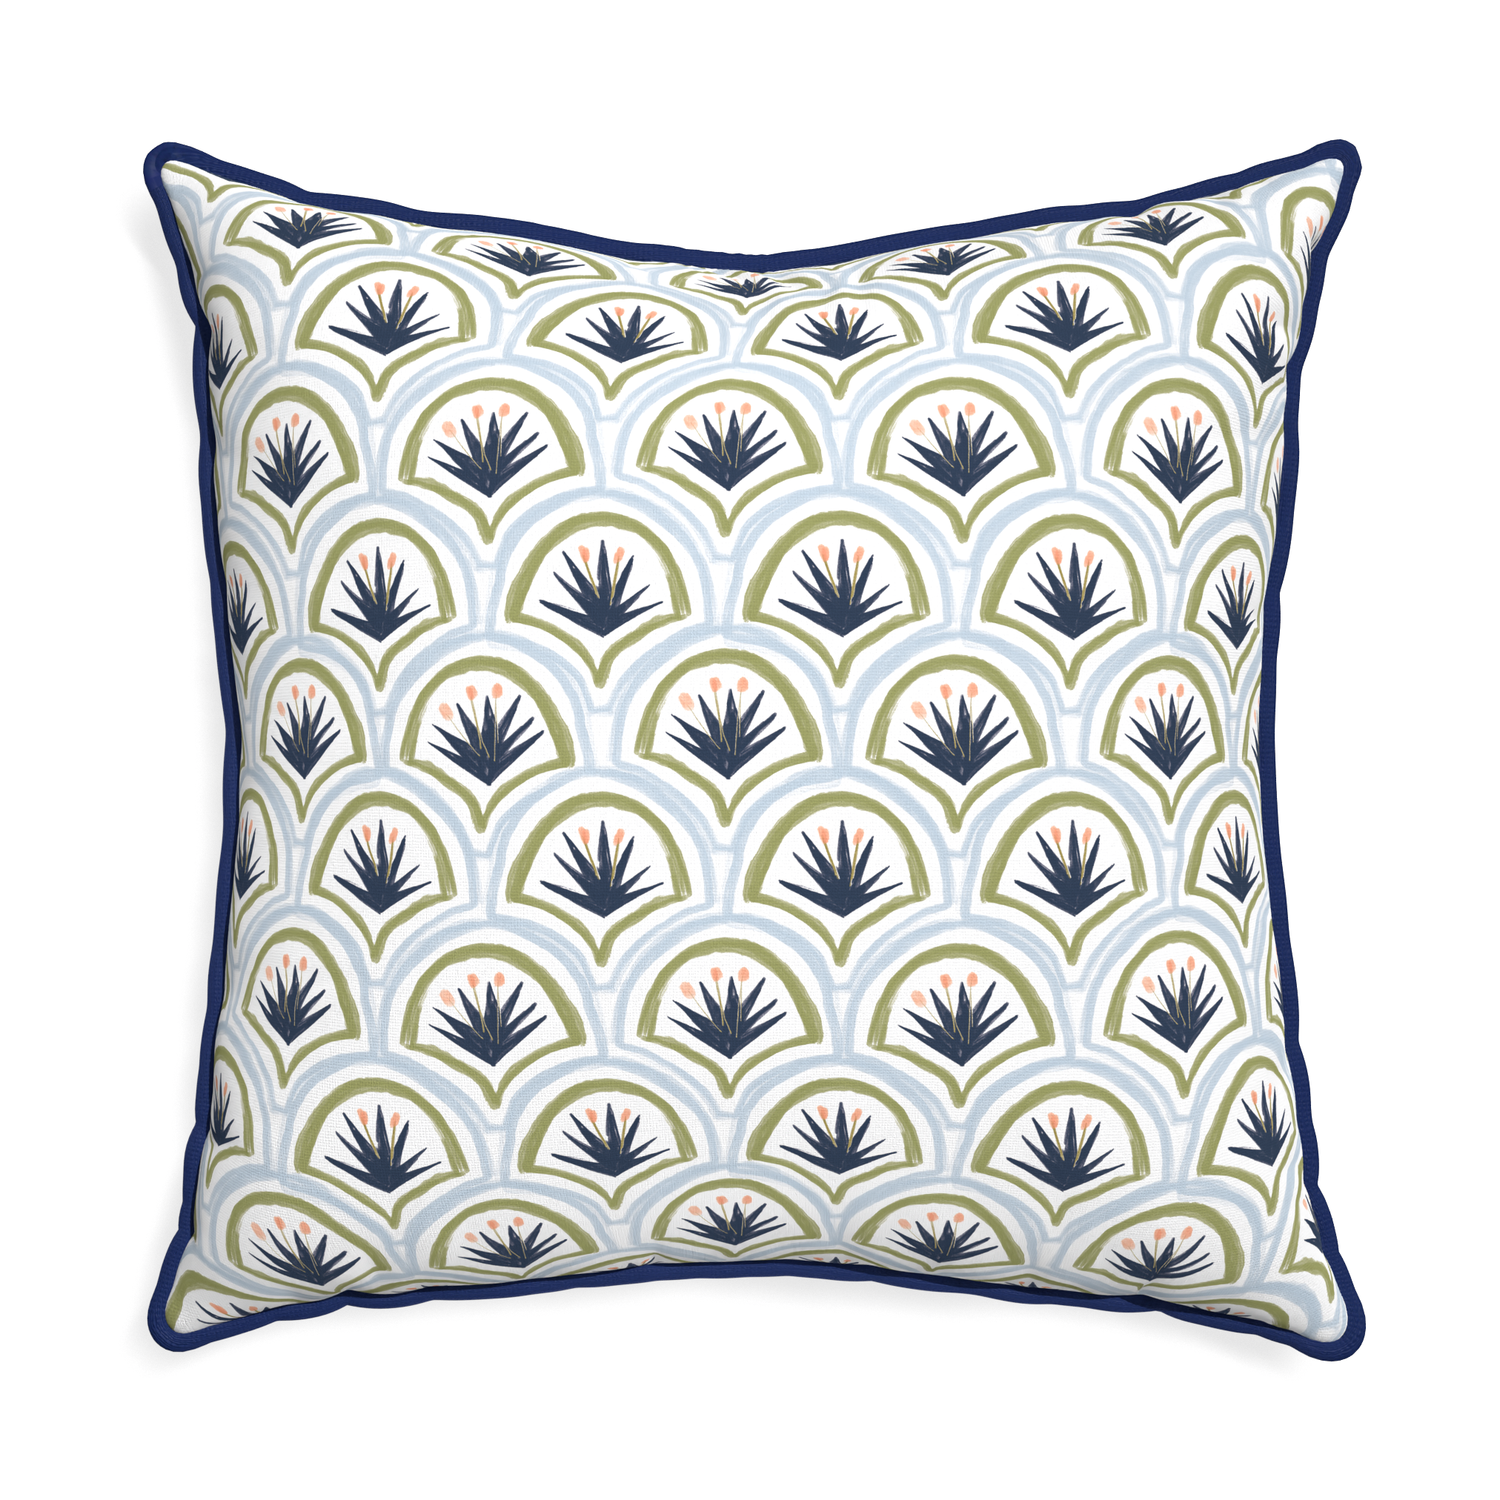 Euro-sham thatcher midnight custom art deco palm patternpillow with midnight piping on white background